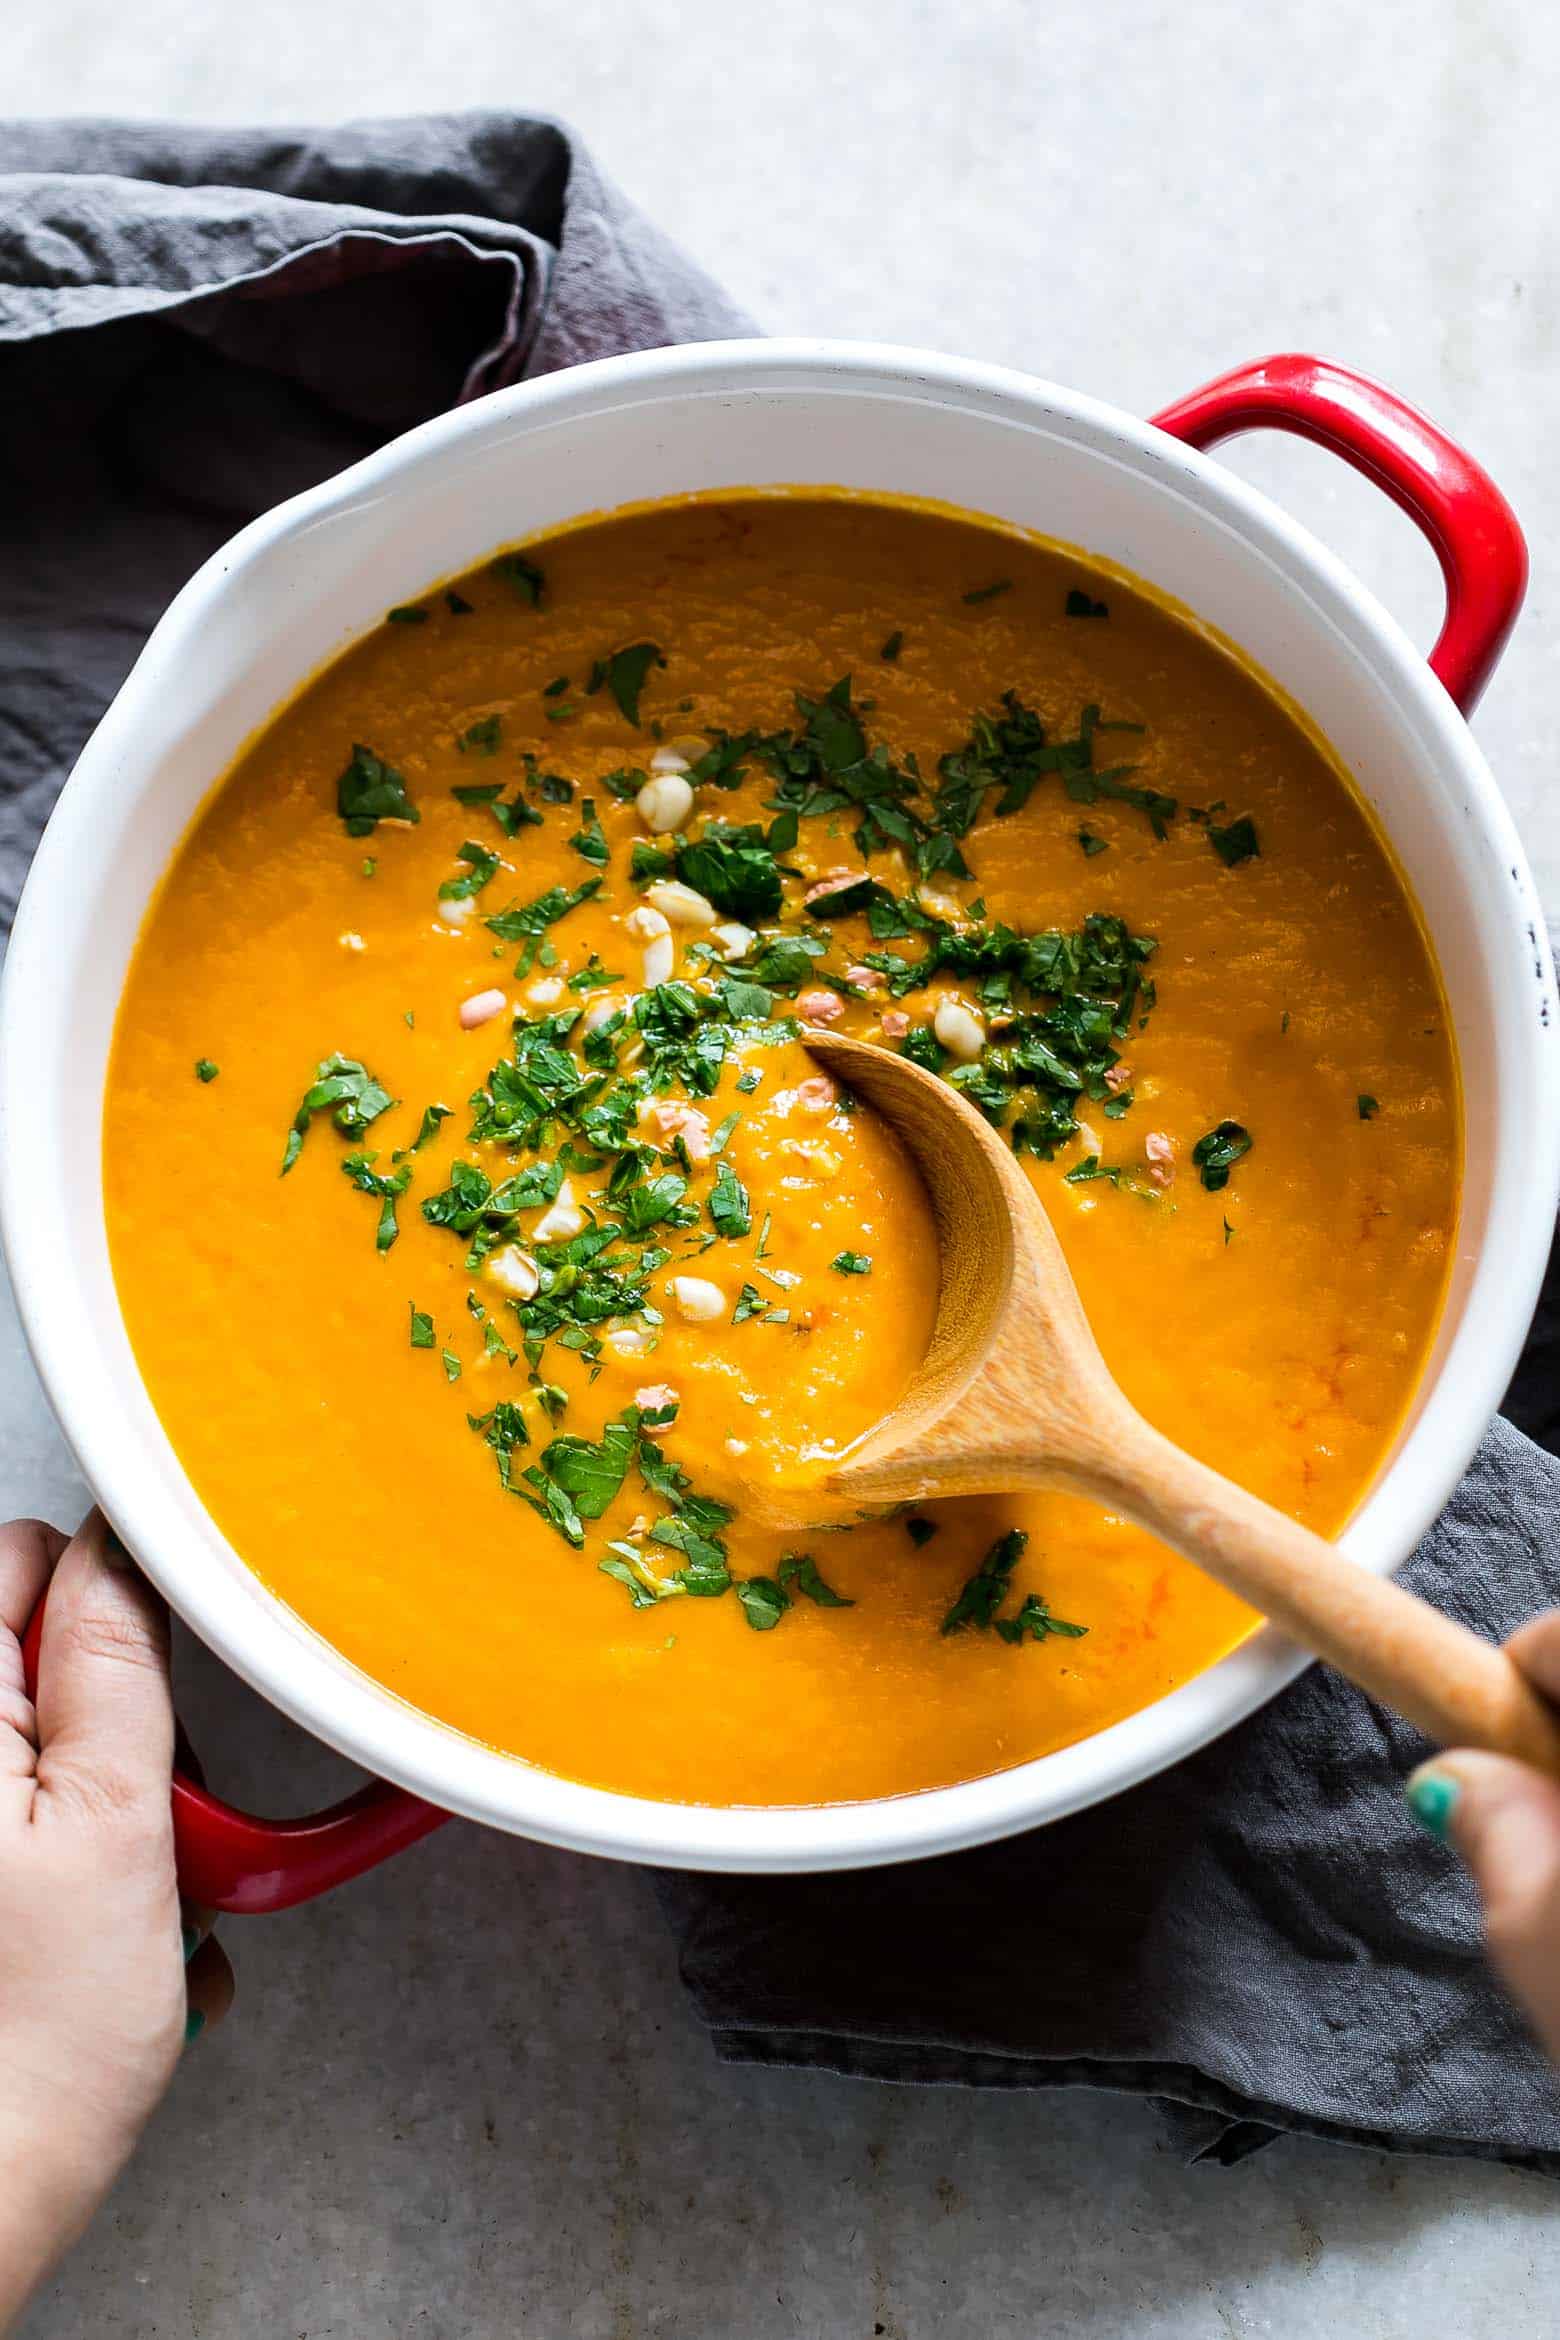 This Thai ginger carrot soup is pure comfort food and is ready in under thirty minutes if you make it in a pressure cooker. The flavours are bold, the texture is creamy, the recipe healthy and it becomes a complete meal if you top it with some noodles!